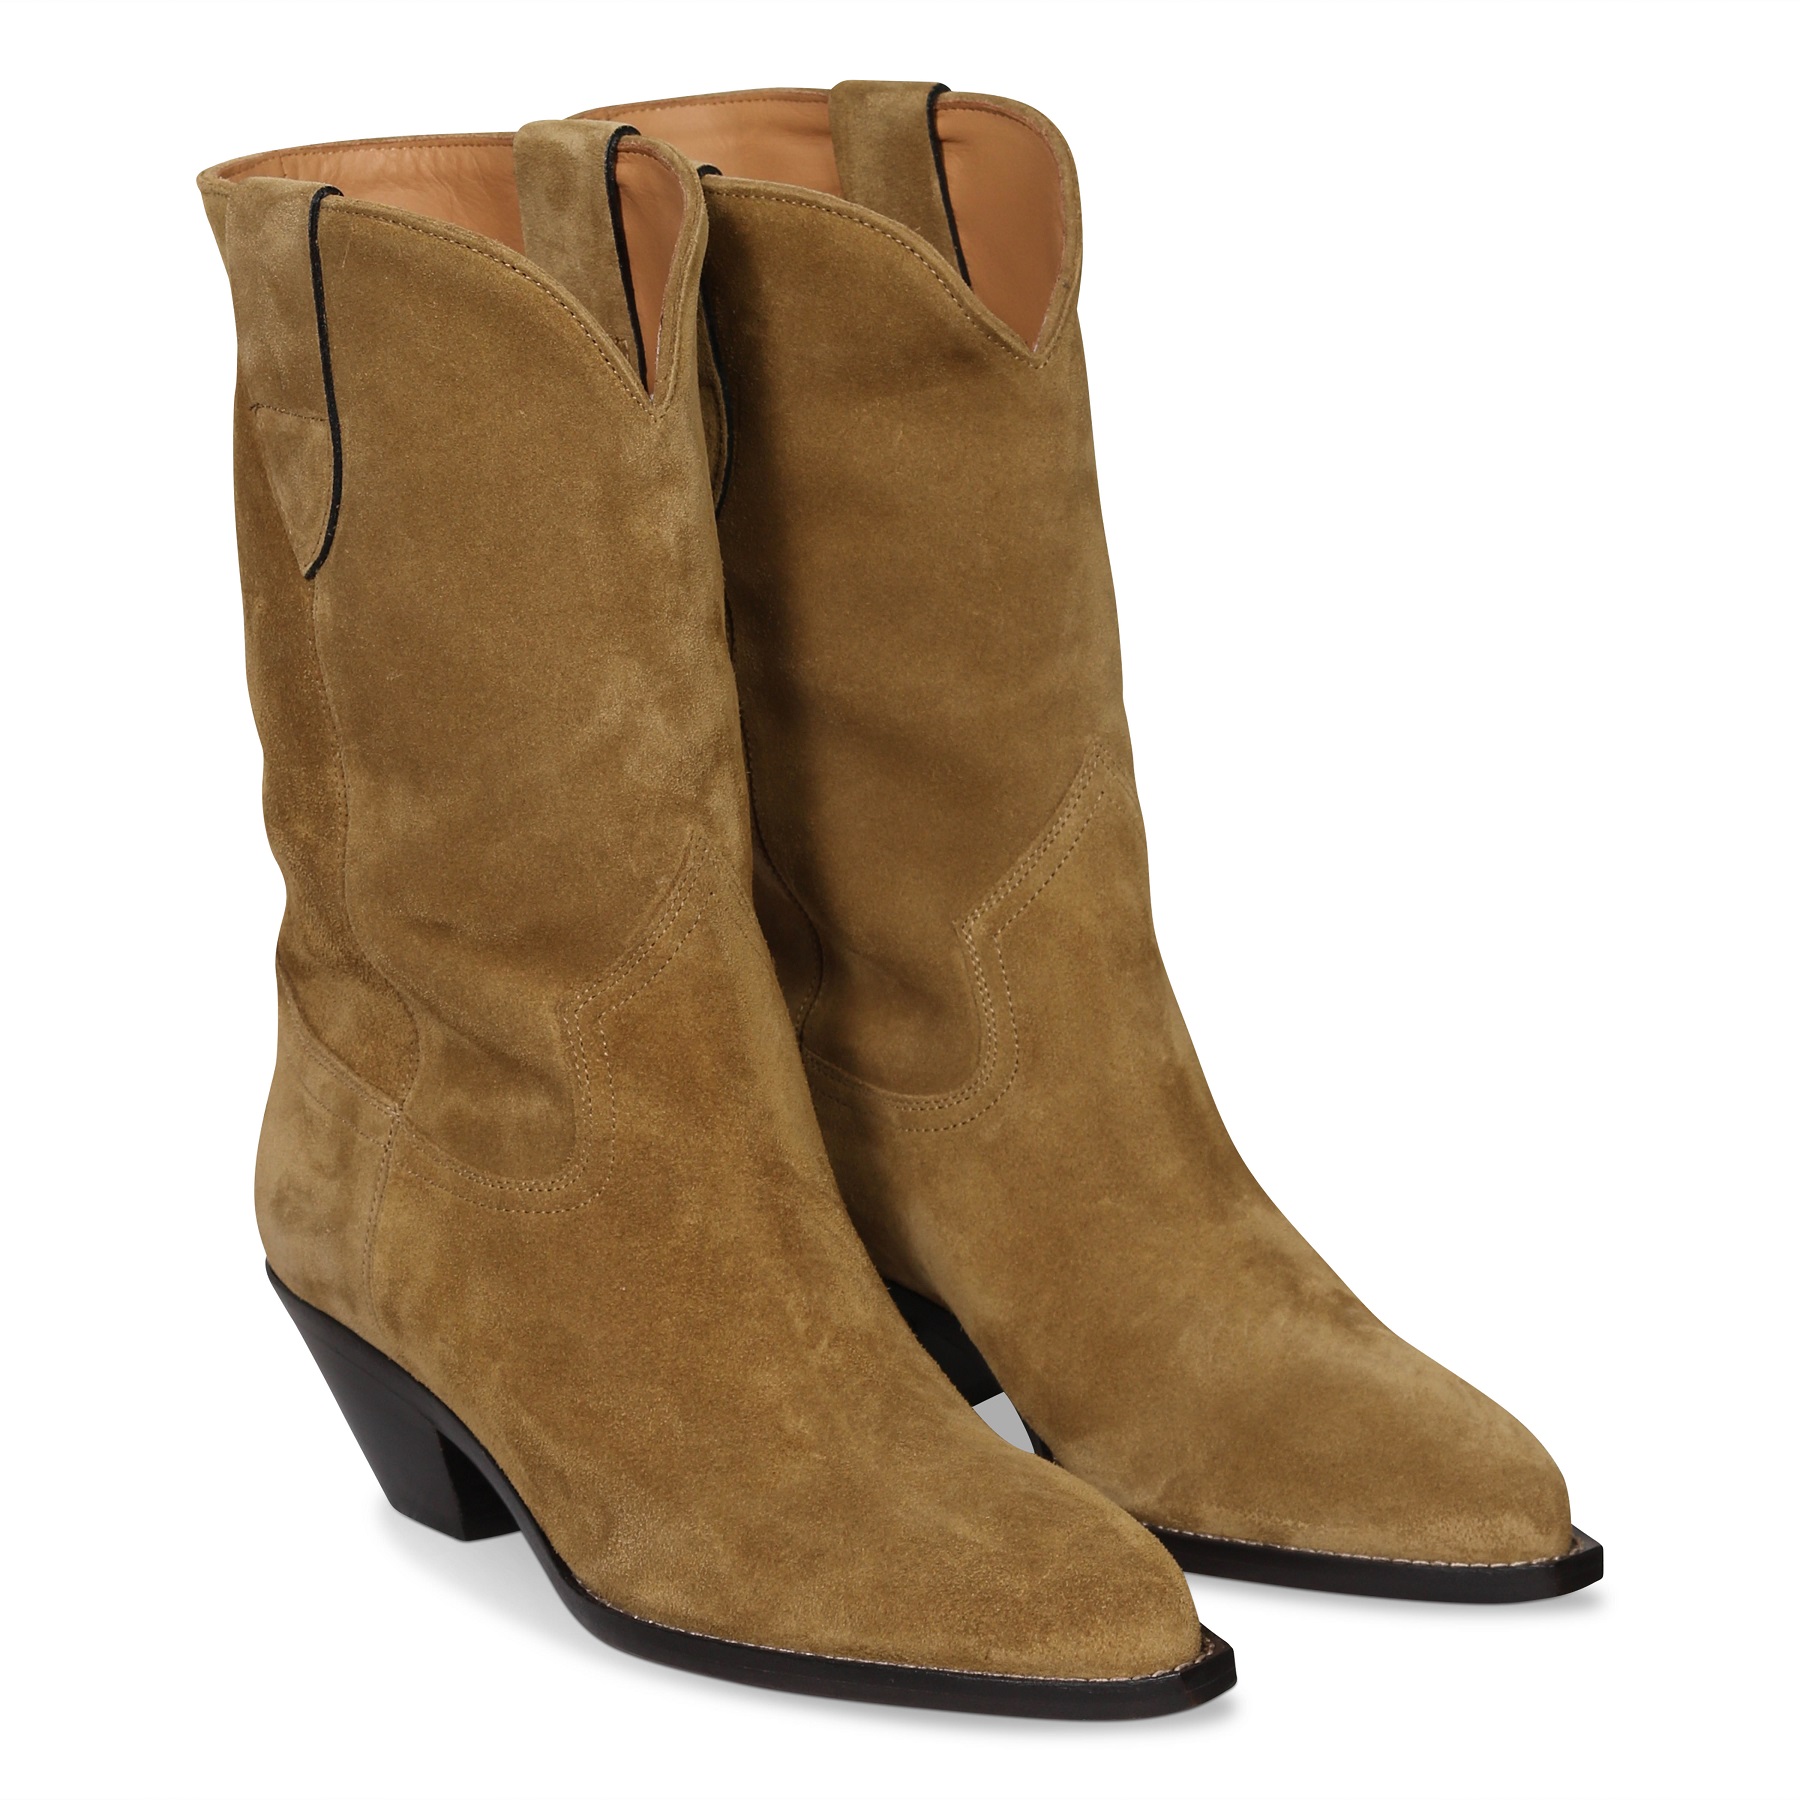 ISABEL MARANT Dahope Boots in Taupe 38